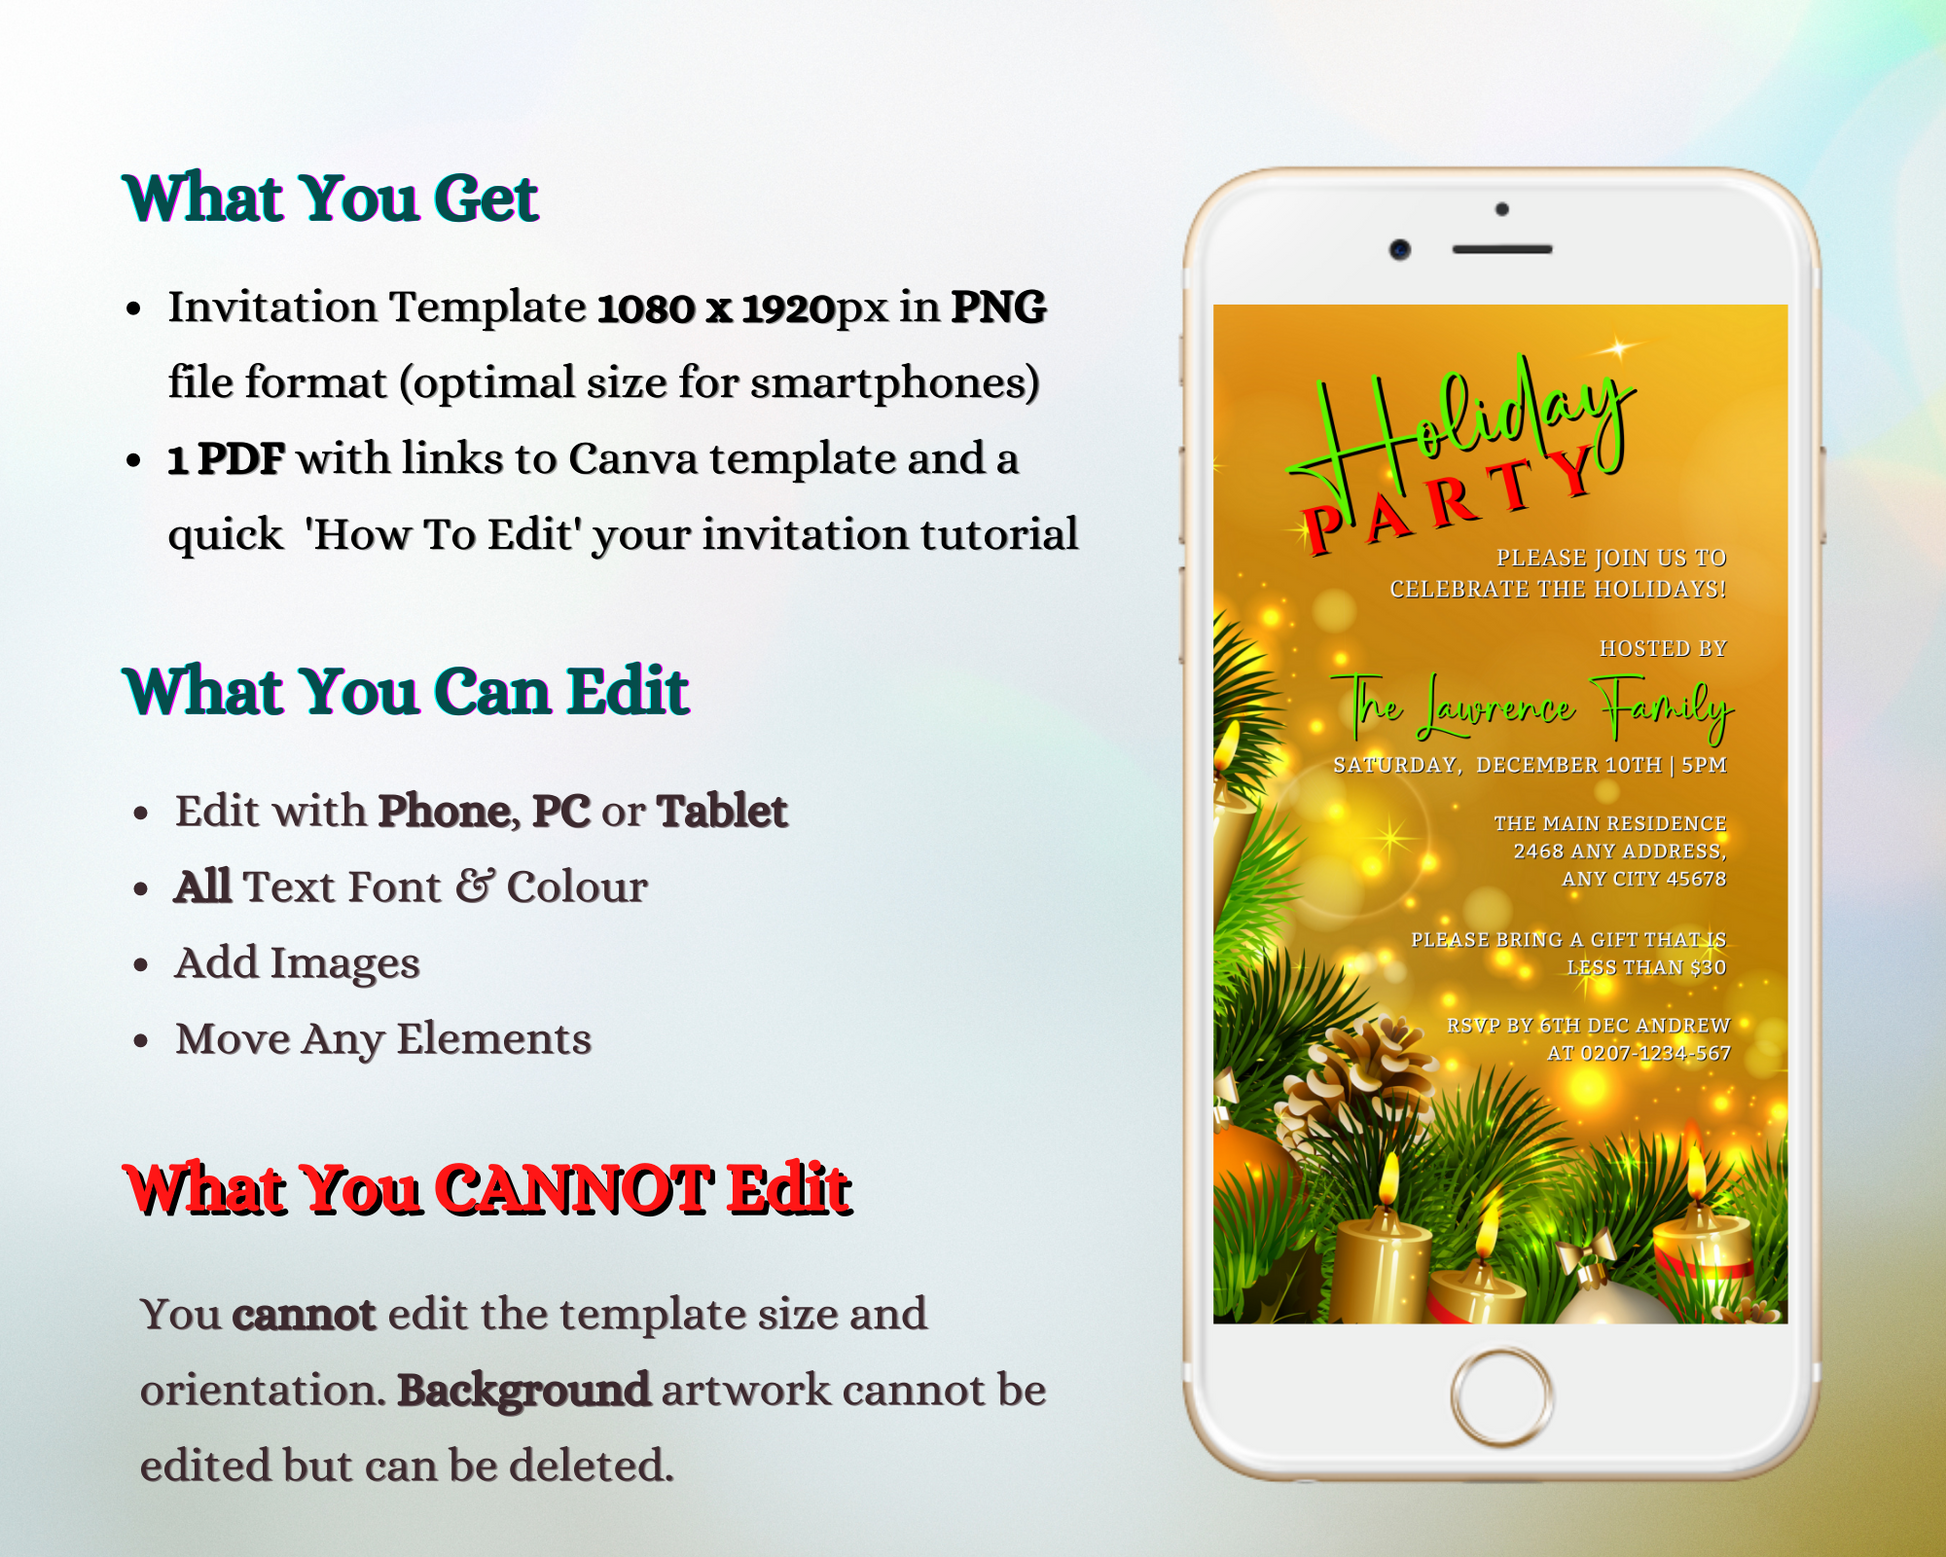 White smartphone displaying Gold Candles Ornaments | Christmas Party Evite template for customization via Canva, promoting eco-friendly, digital invitations from URCordiallyInvited.